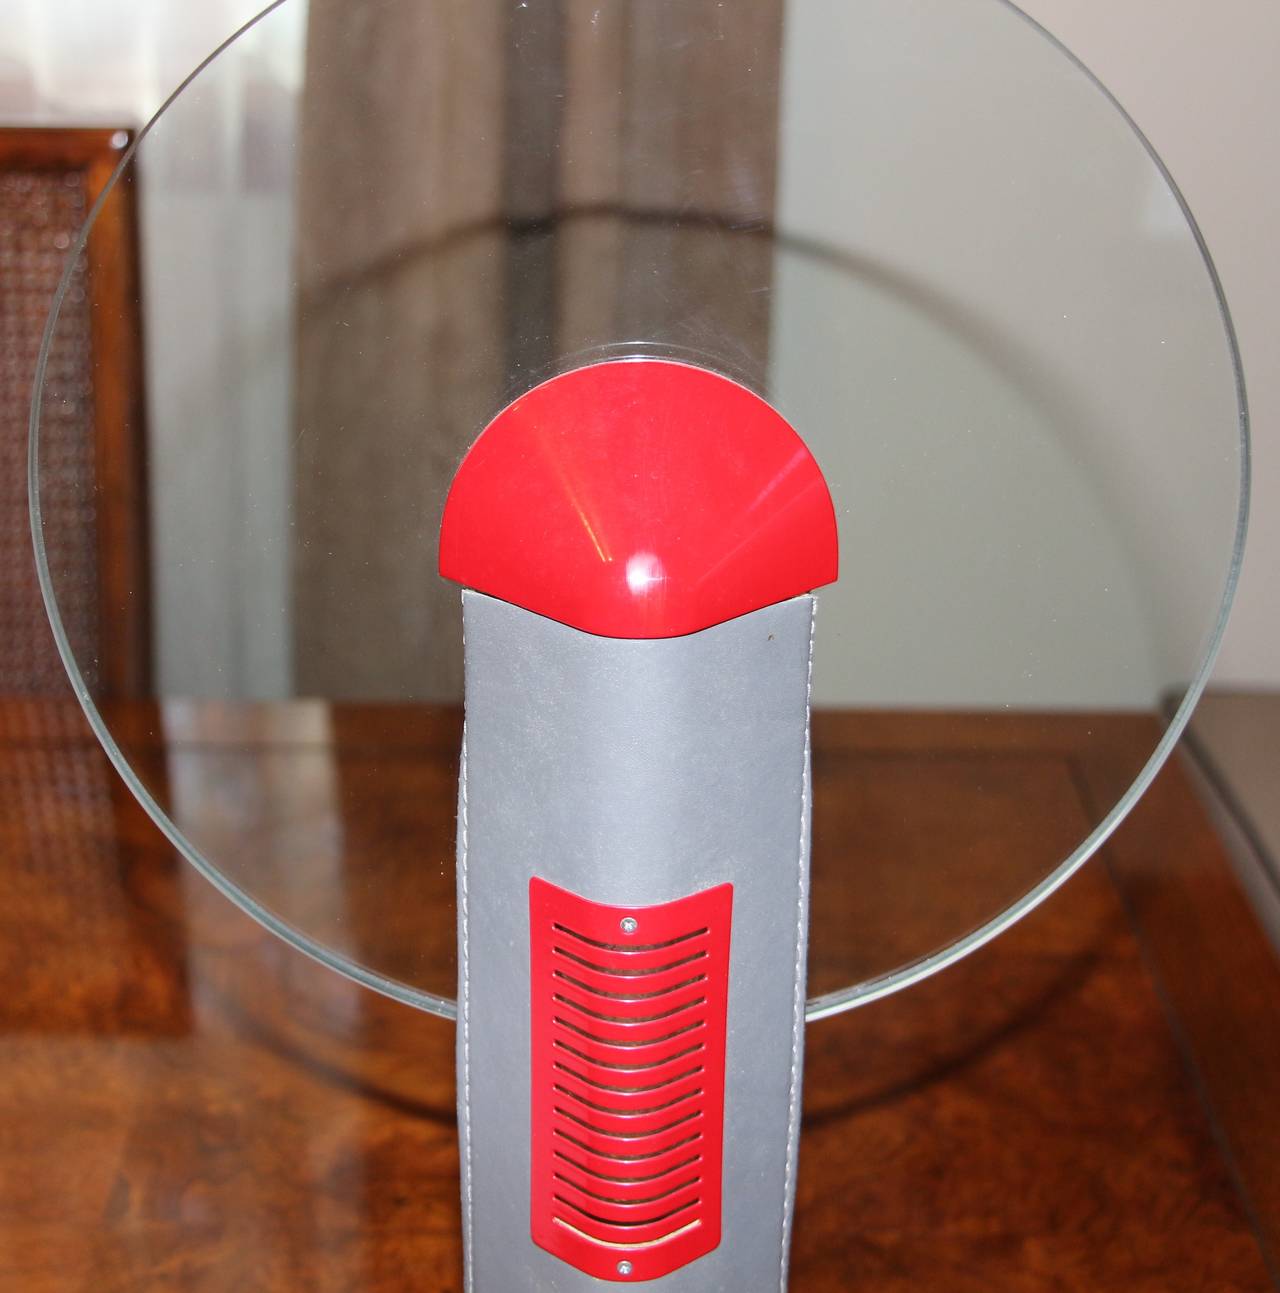 An unusual Relco Italia halogen table lamp with a dimmer on off switch. The lamp is made out of red enamel metal, grey leather, and a glass disk. The lamp is in working order.